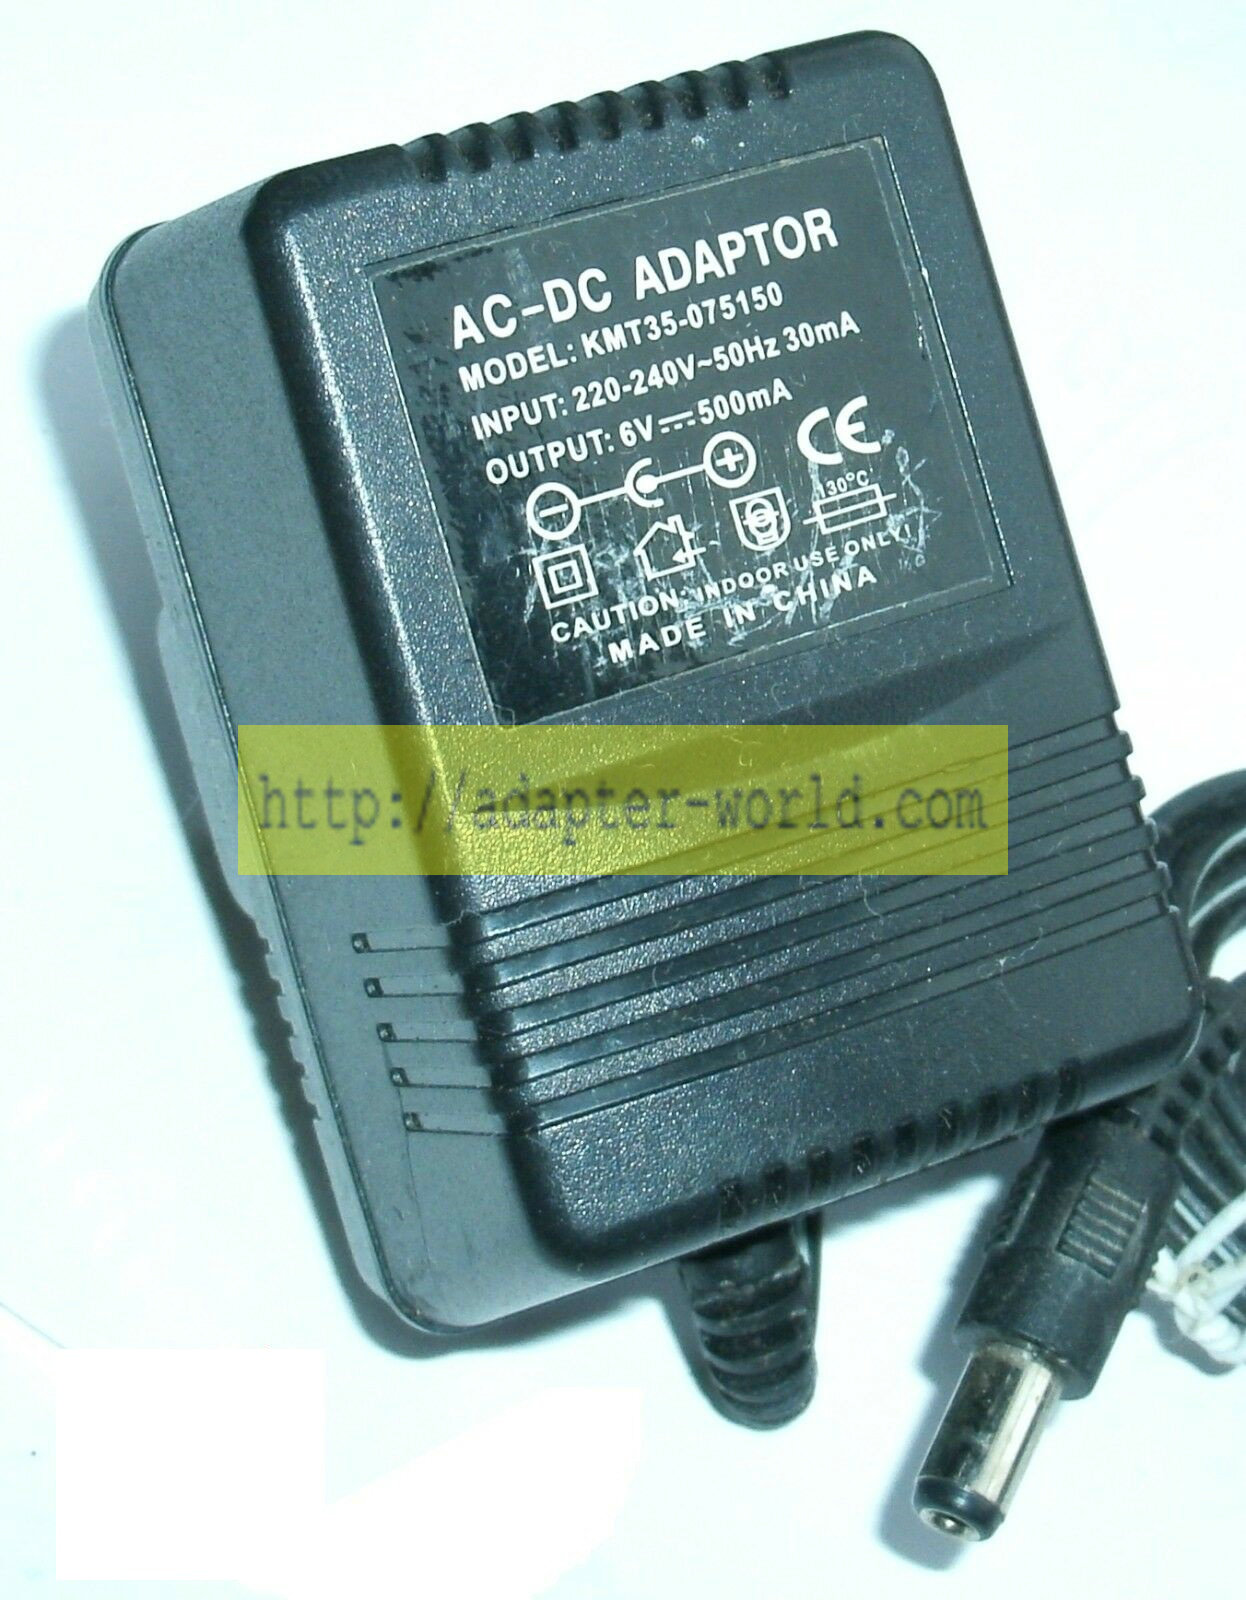 *Brand NEW*6V 500mA AC/DC POWER ADAPTER KMT35-075150